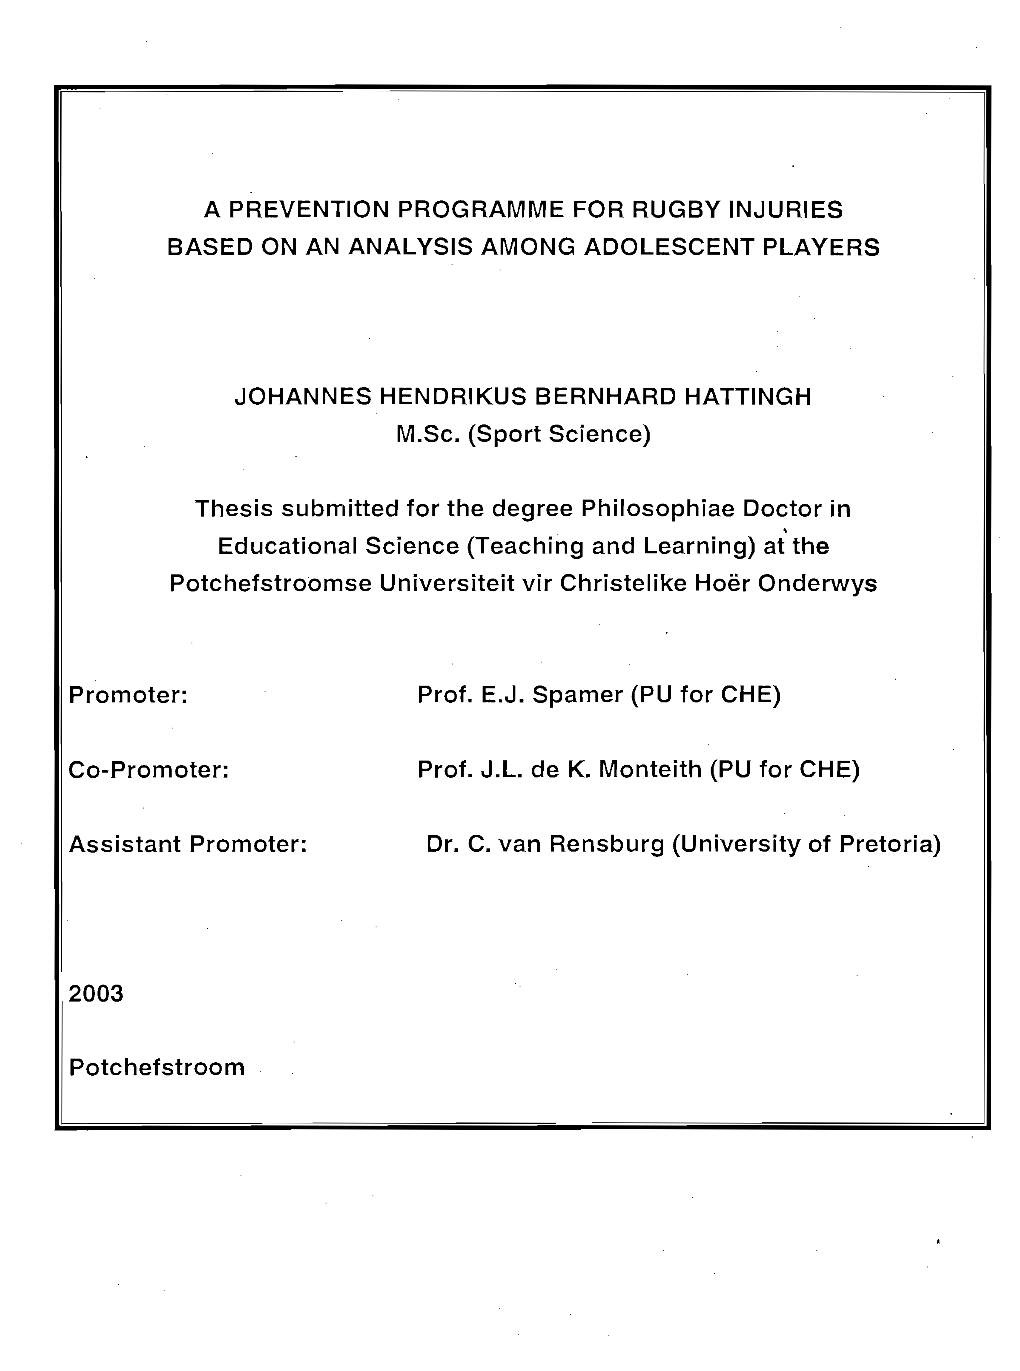 A Prevention Programme for Rugby Injuries Based on an Analysis Among Adolescent Players